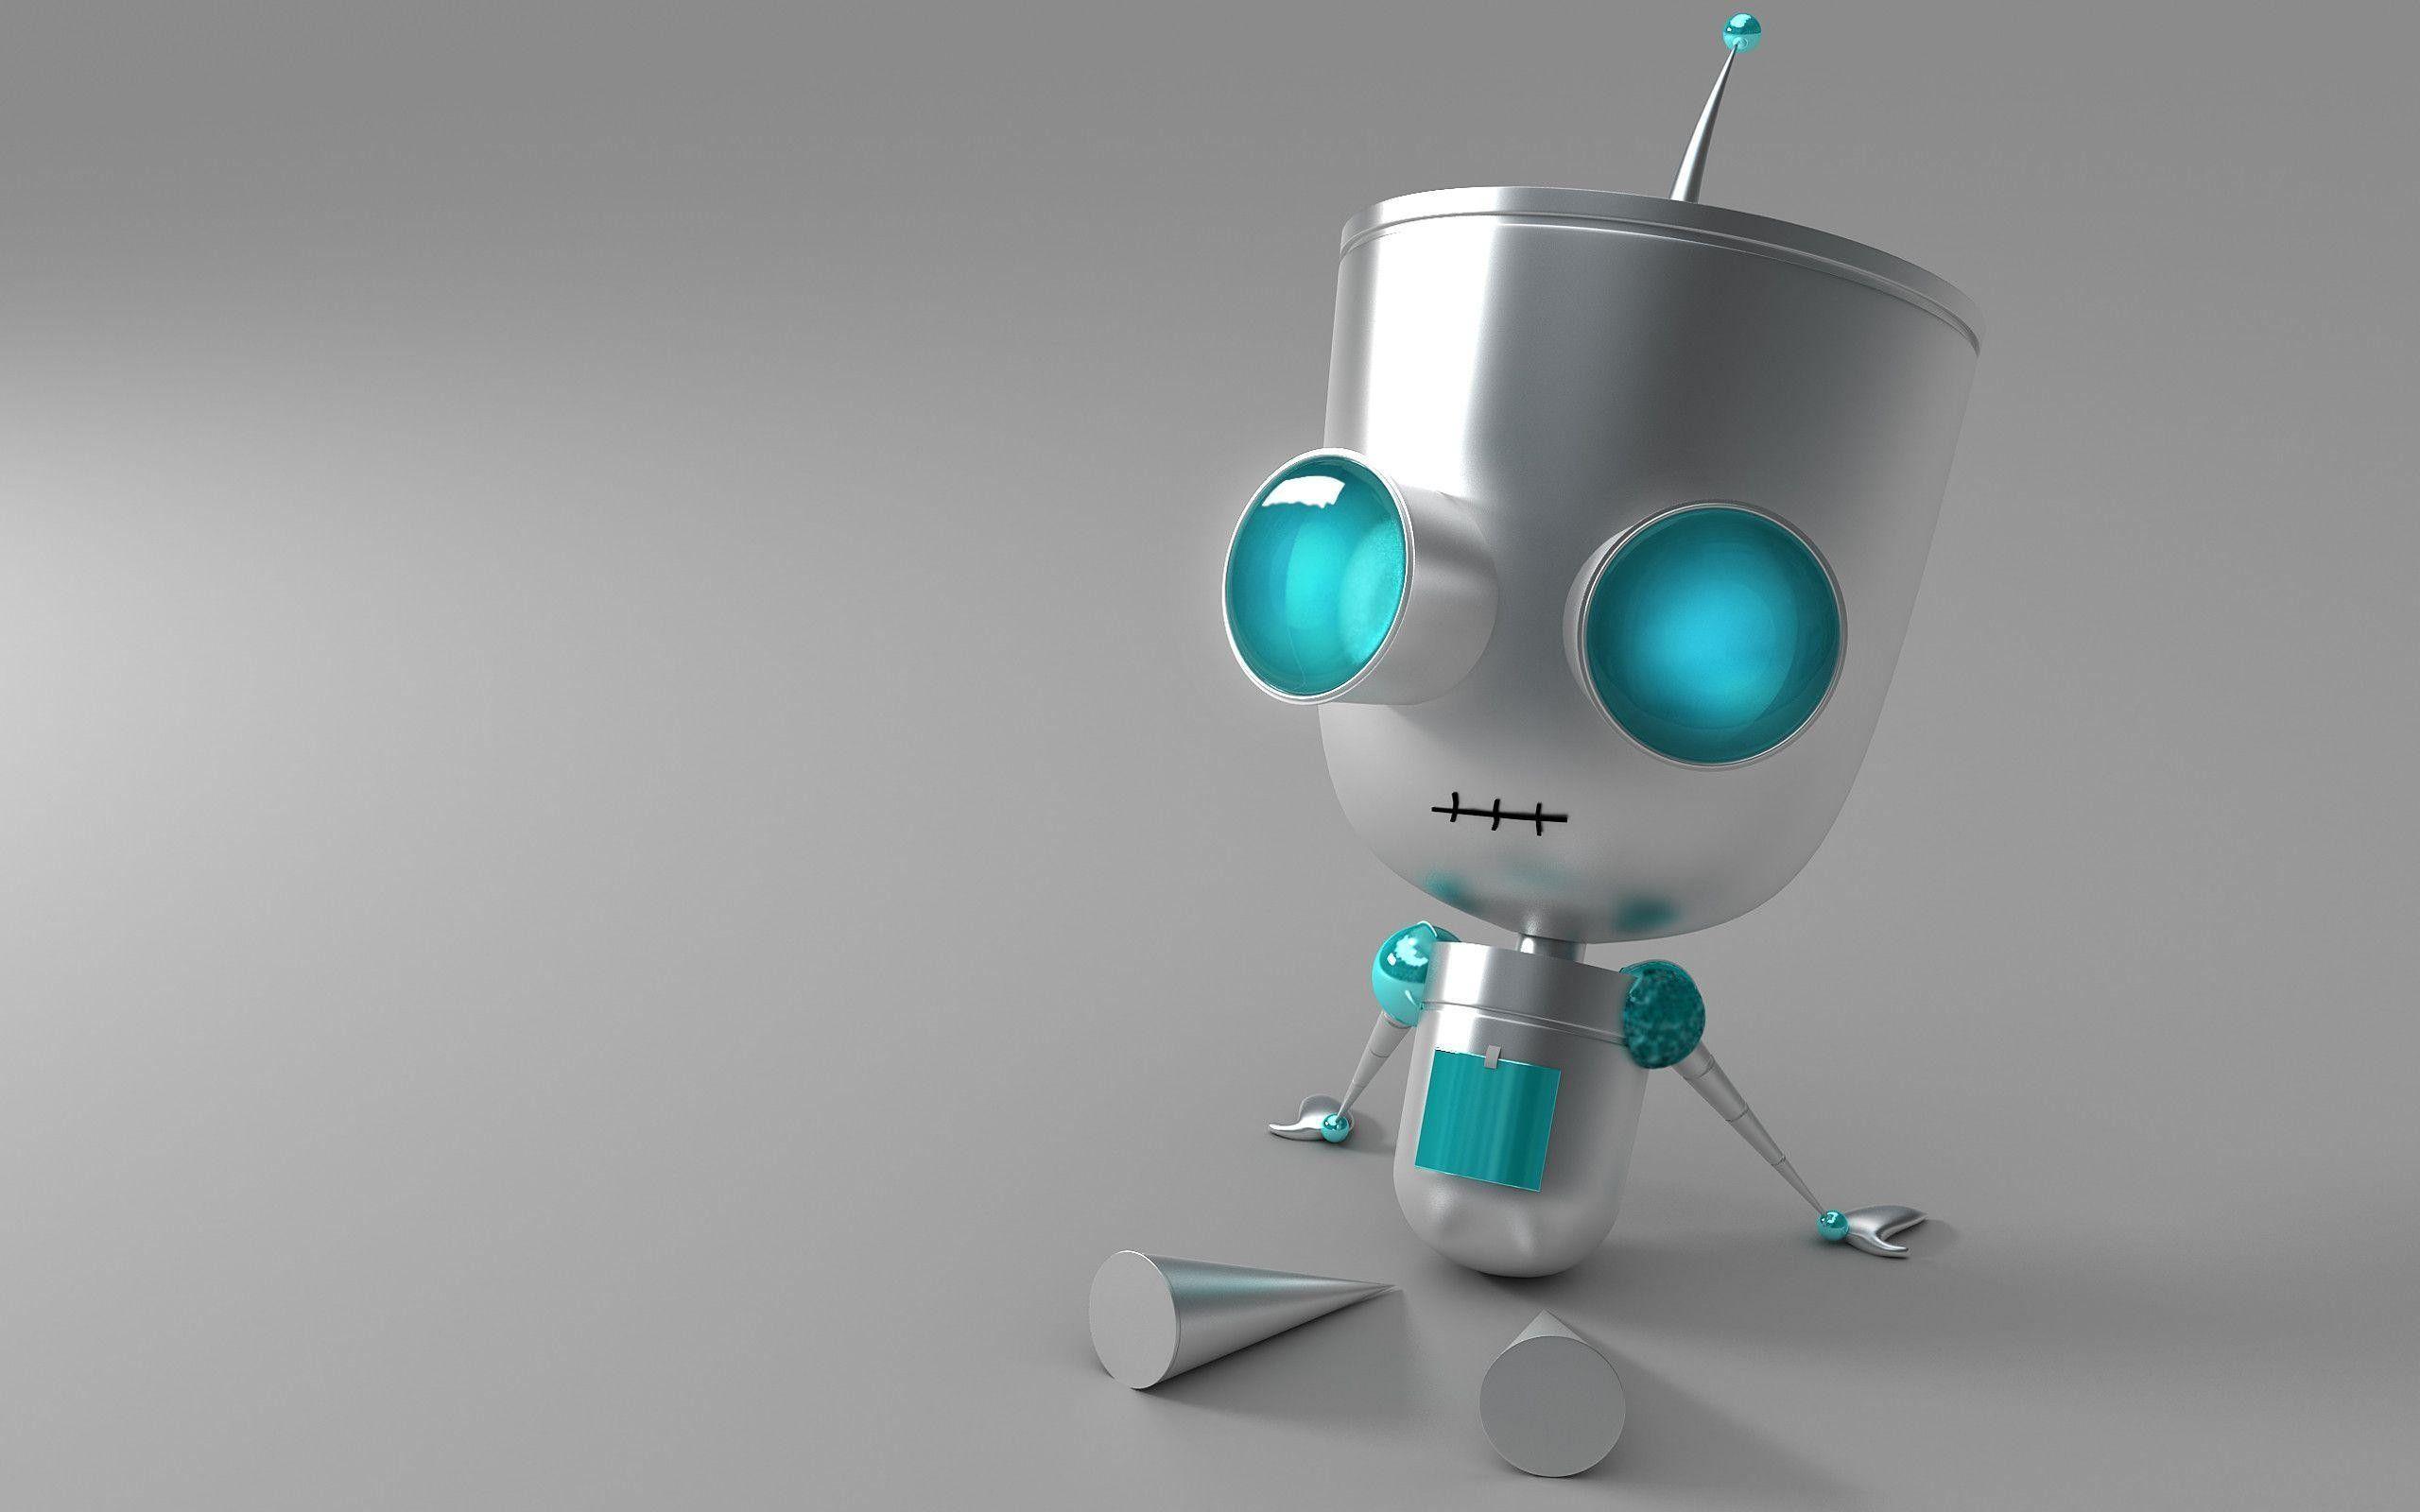 Cute Robot Background Images HD Pictures and Wallpaper For Free Download   Pngtree